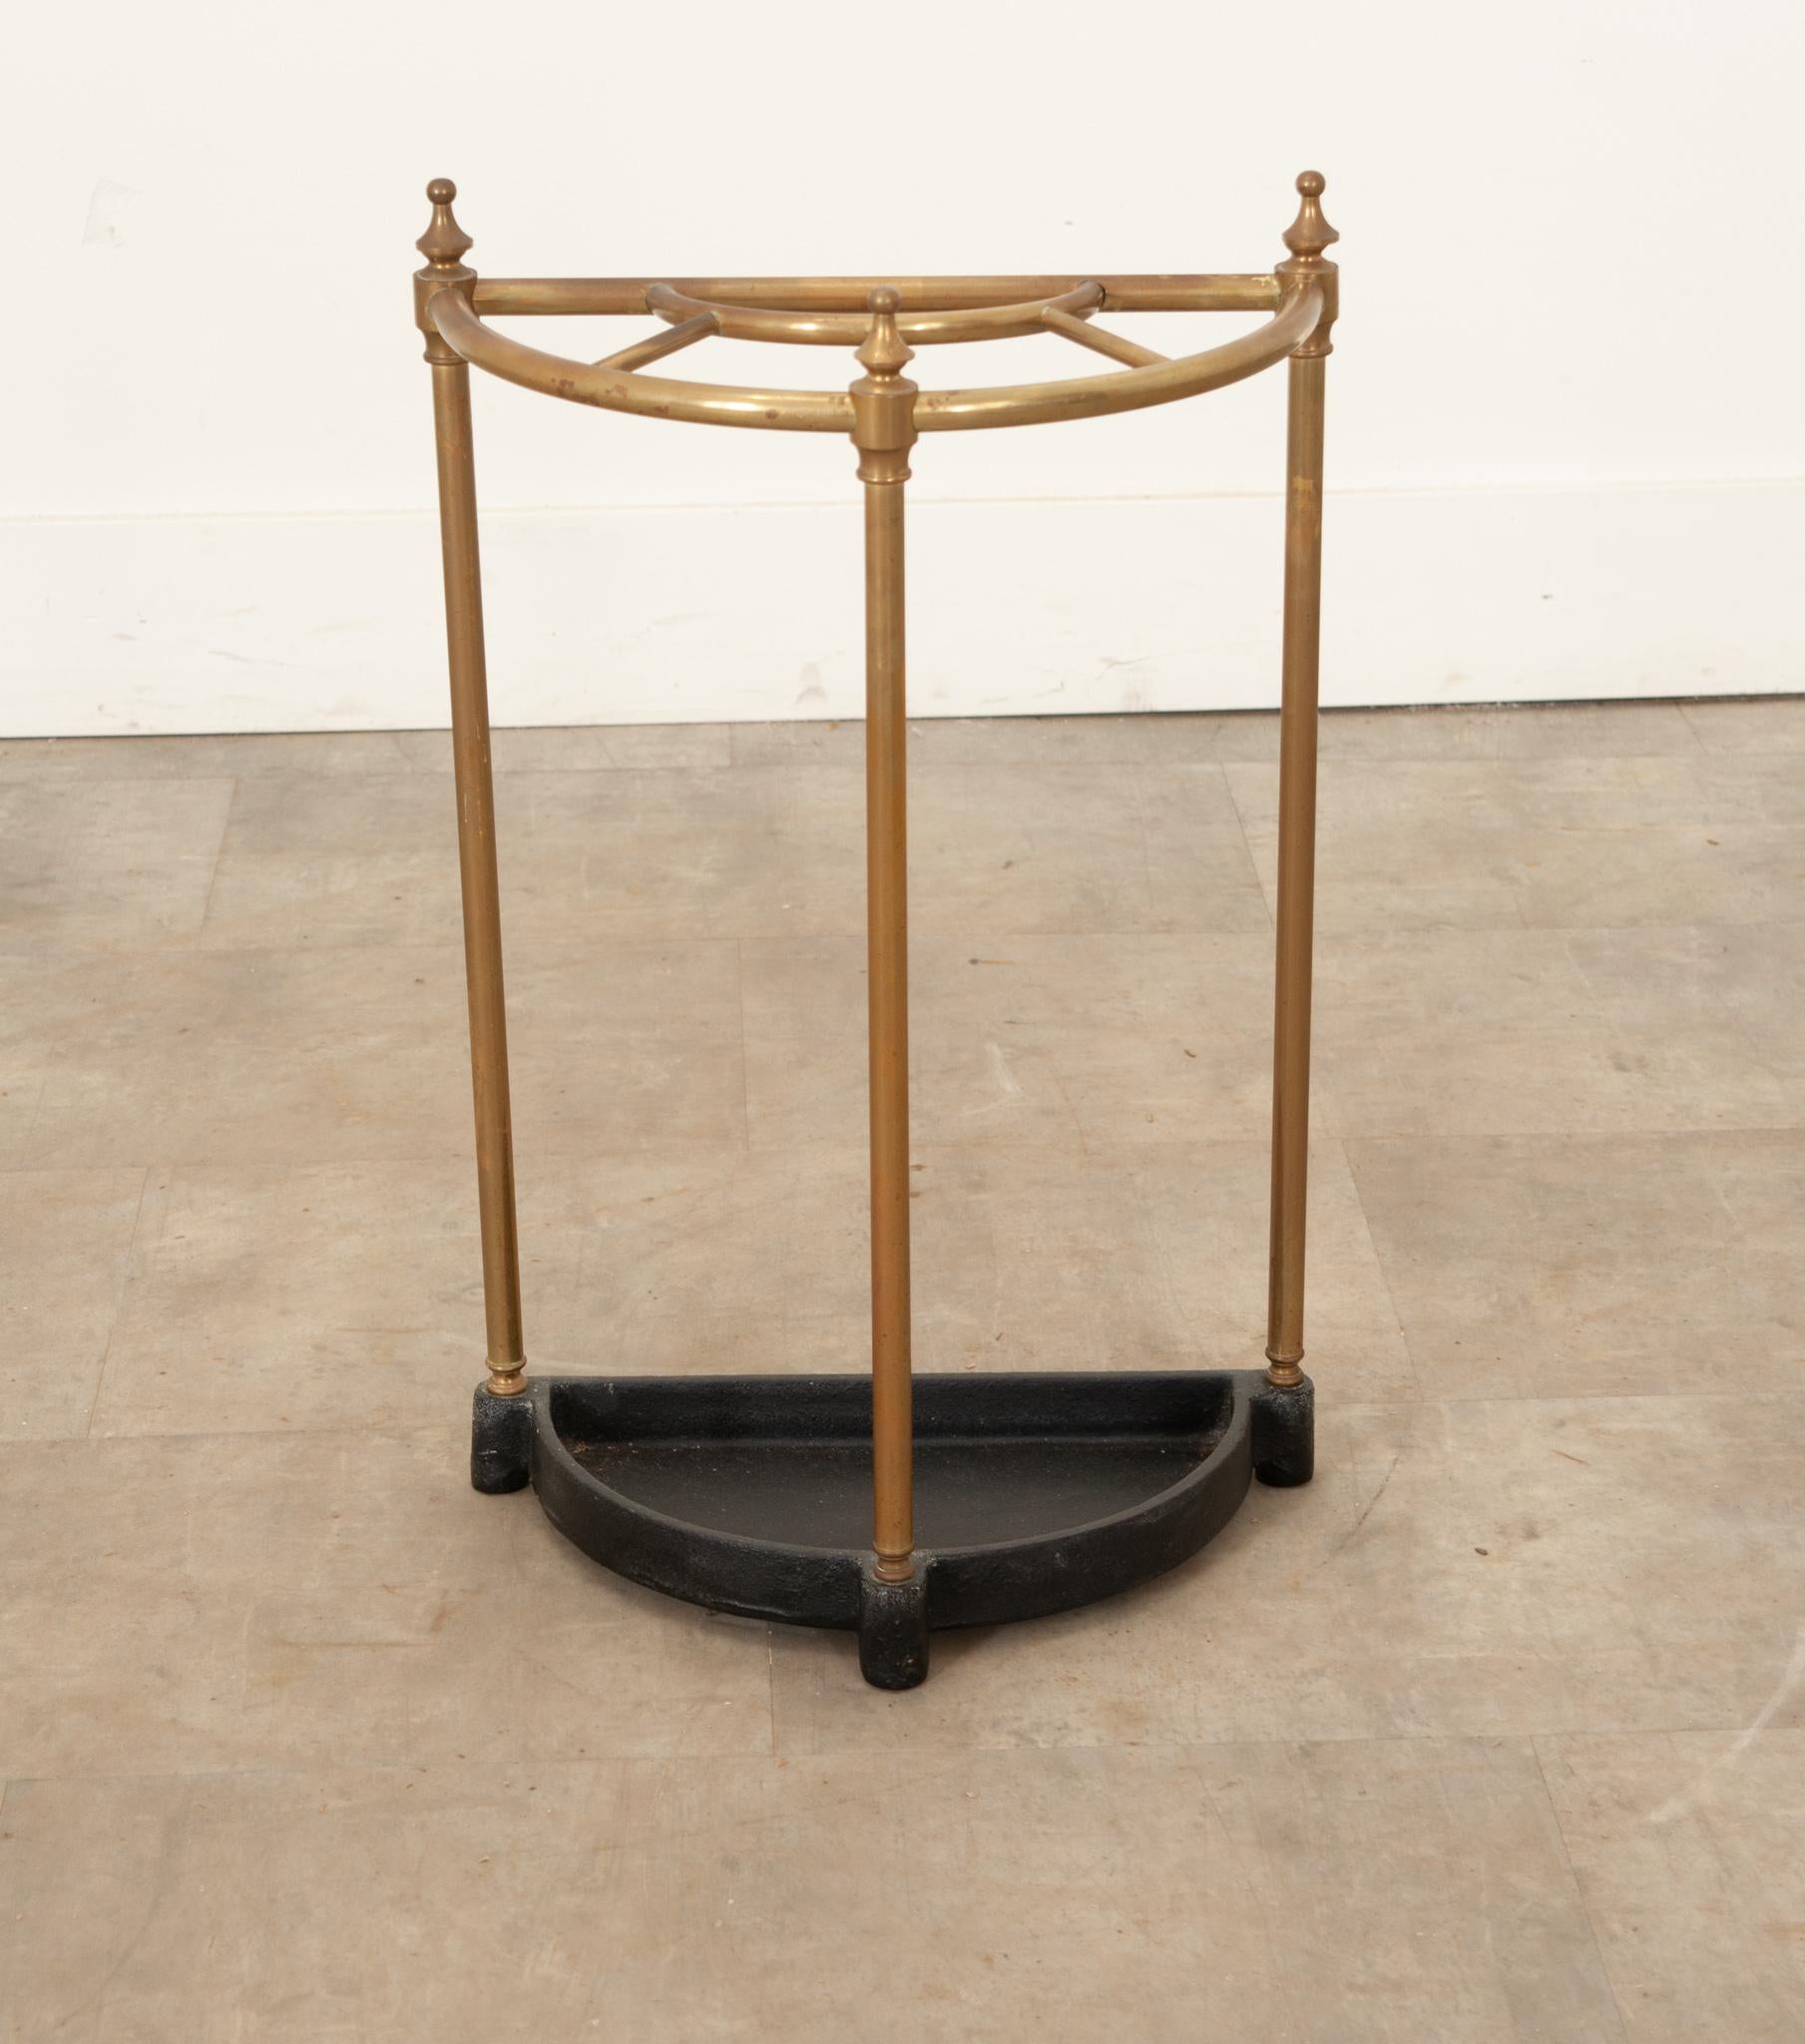 A classic vintage French demi lune brass umbrella or walking stick stand. Elegant and well made, this brass hallway, entry way or closet umbrella or cane stand has five compartments, three decorative finials, and a cast iron drip tray. Constructed